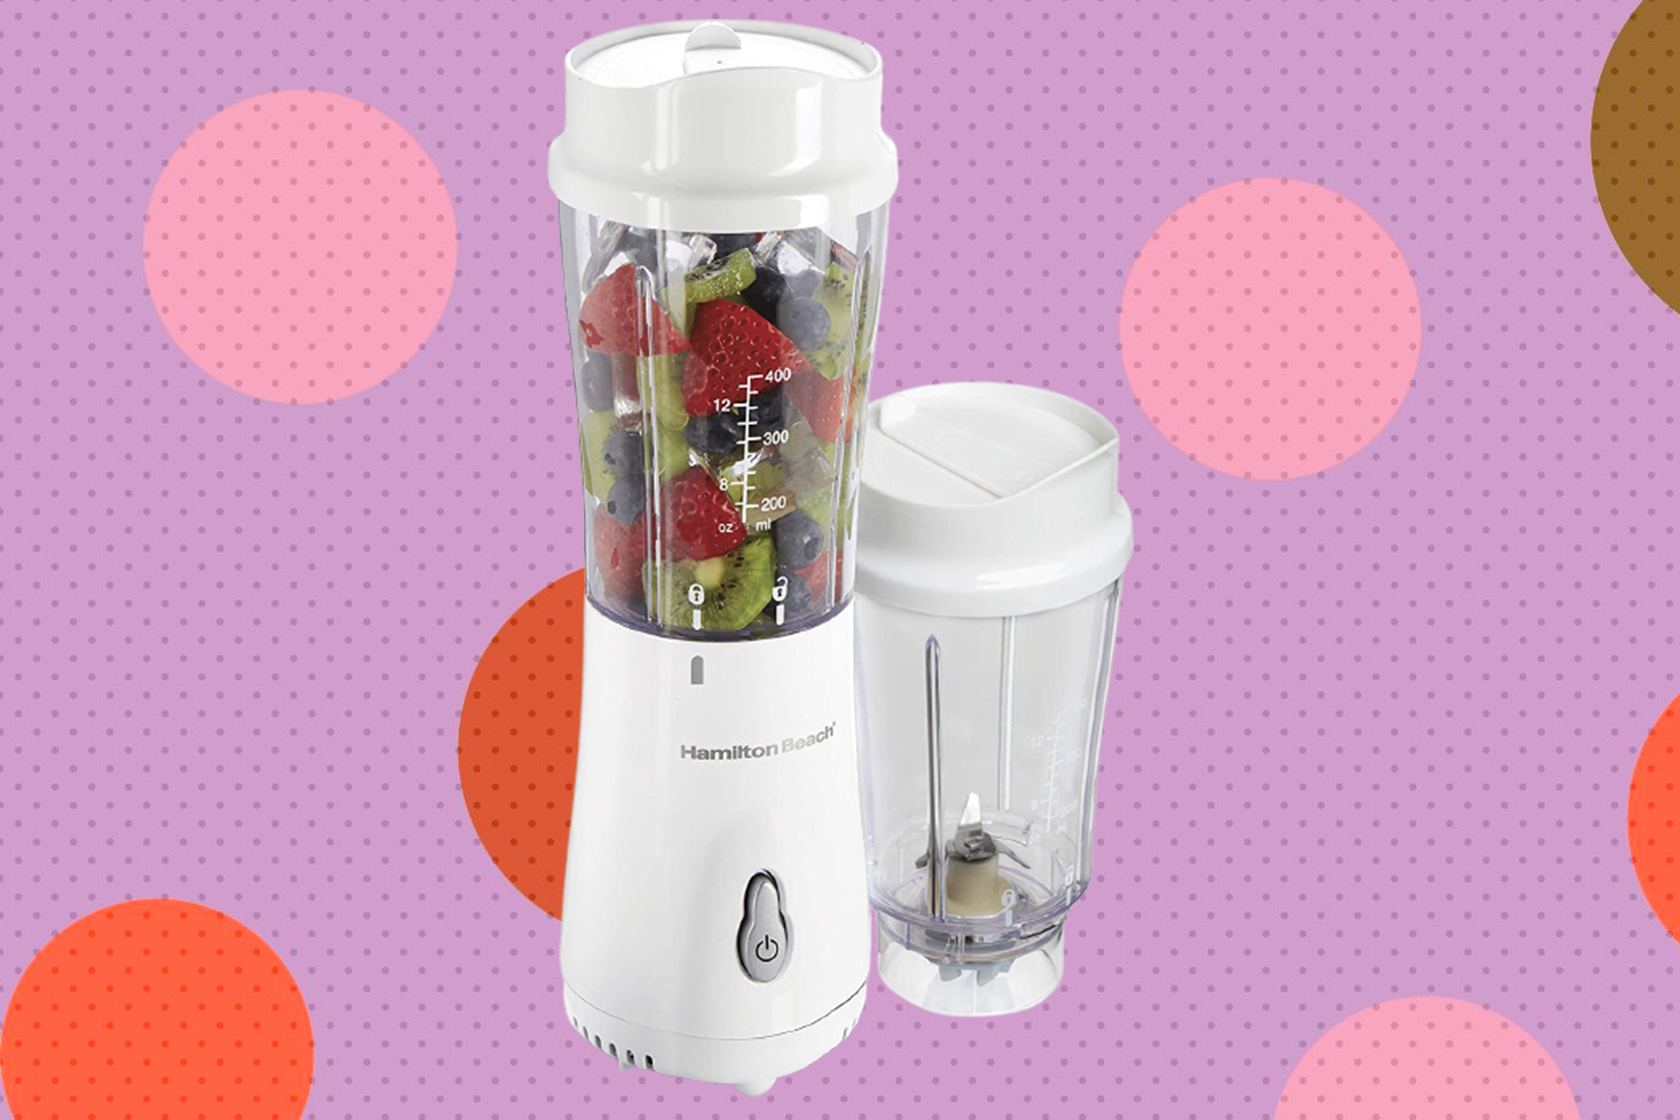 I'm gonna say it: this personal blender is for closers